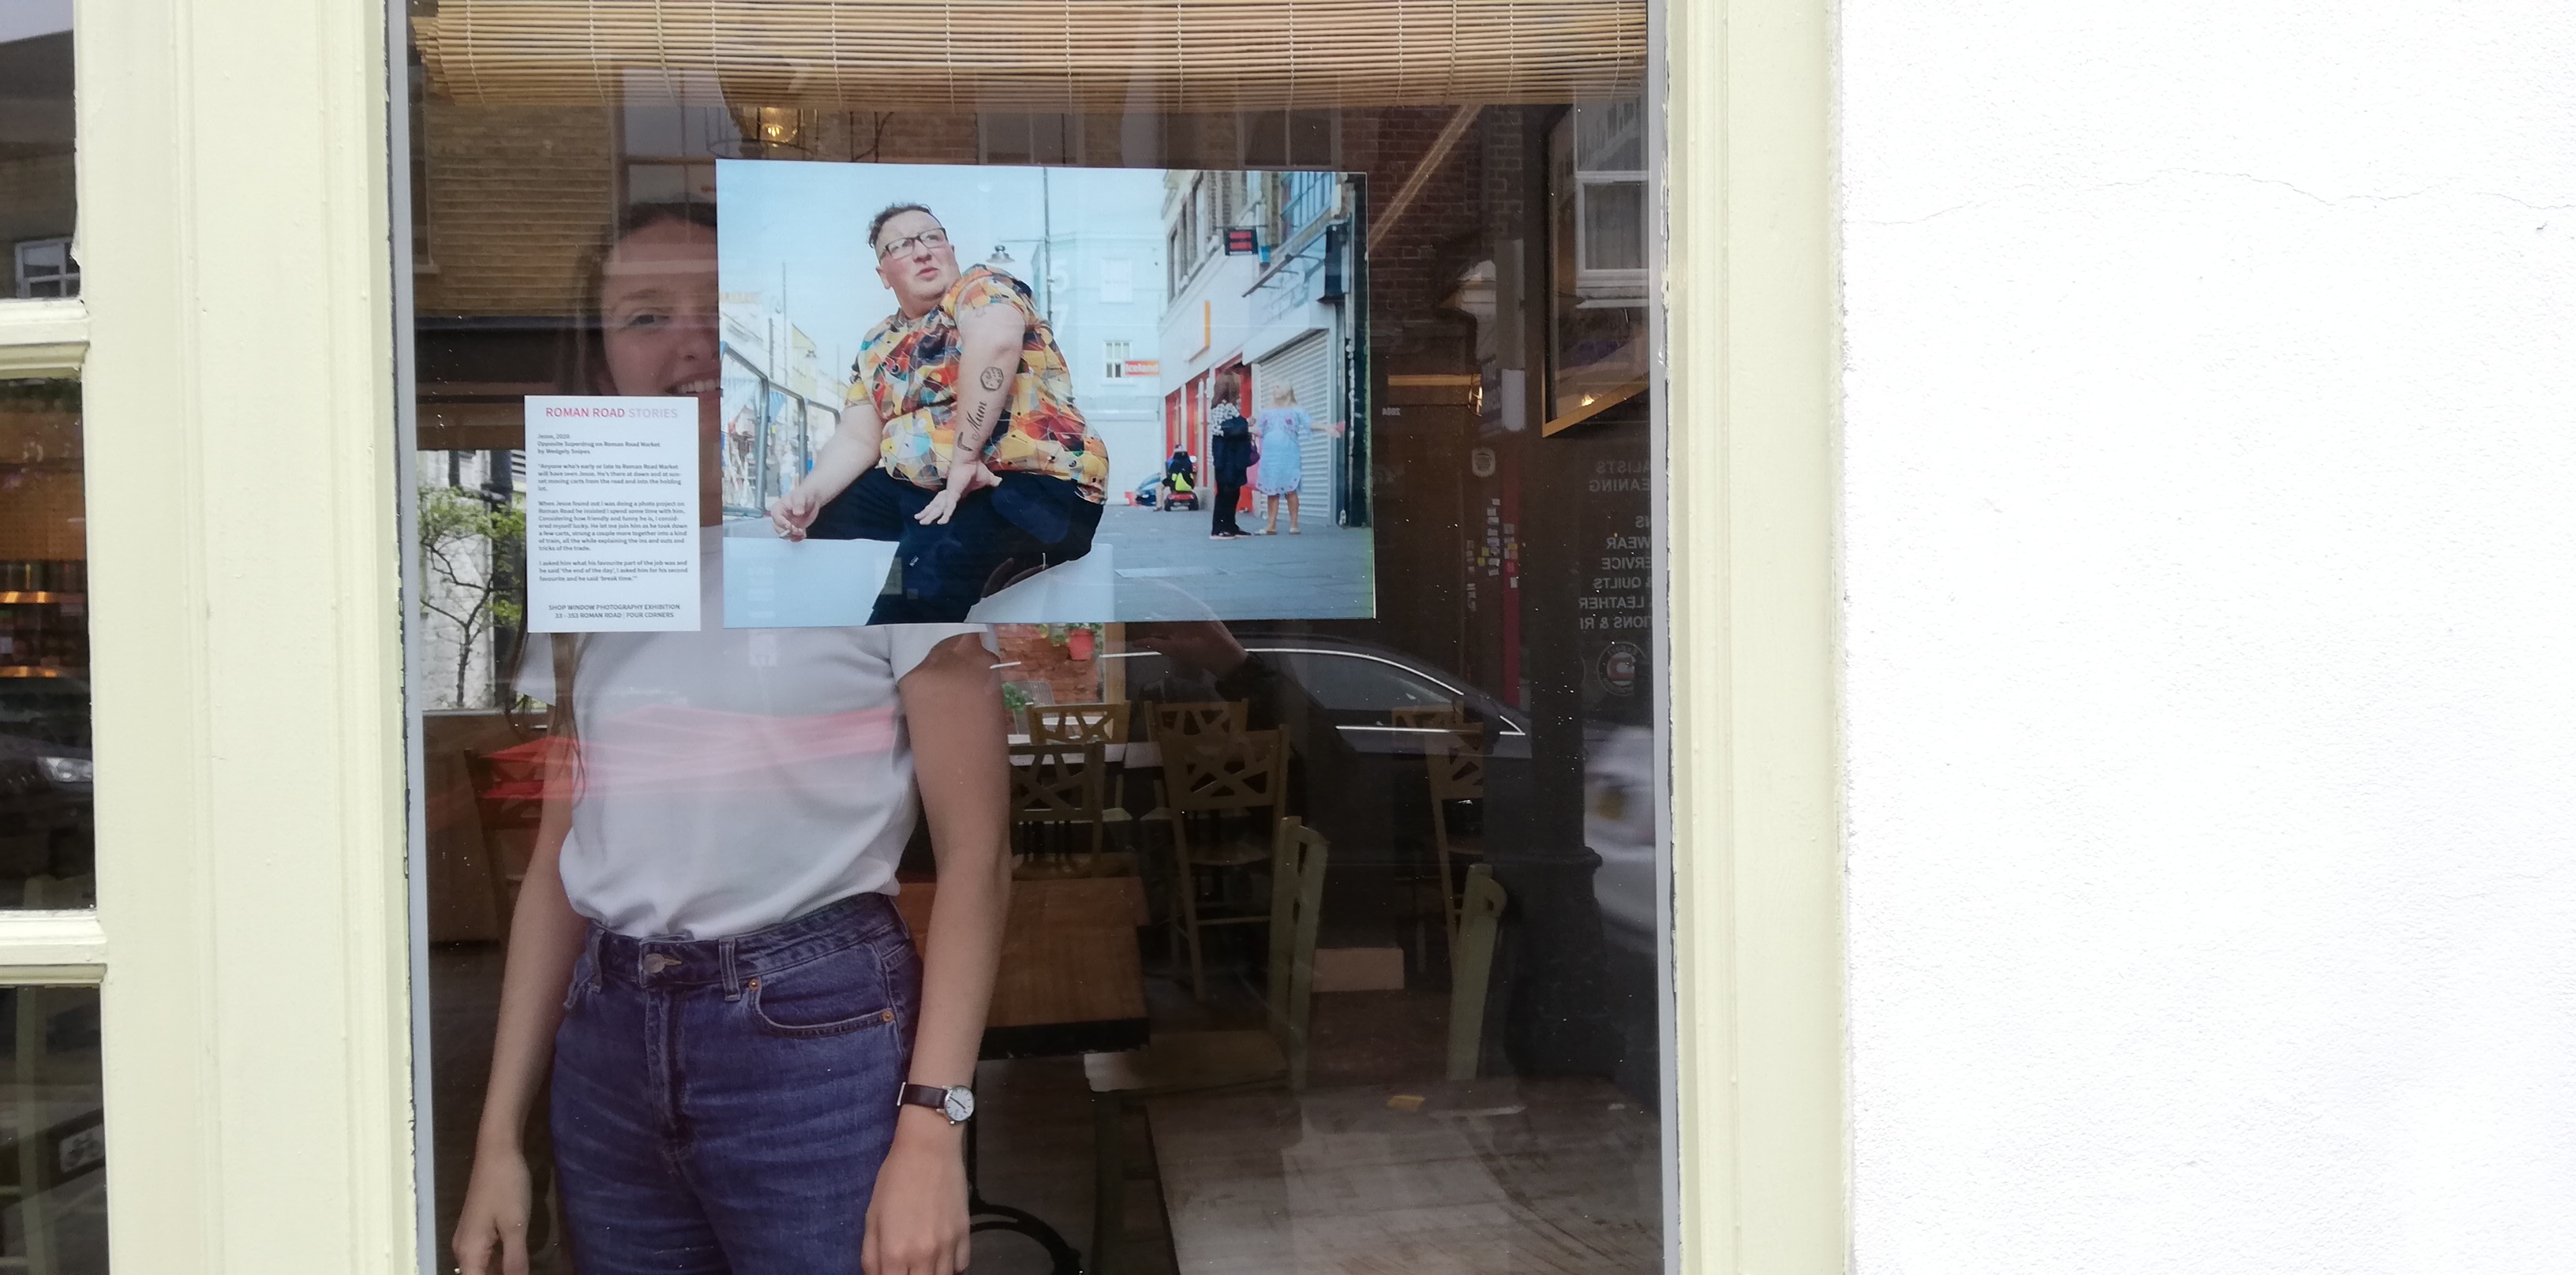 A woman behind the glass window of a cafe. In the window is a photograph of a man in a colourful shirt 